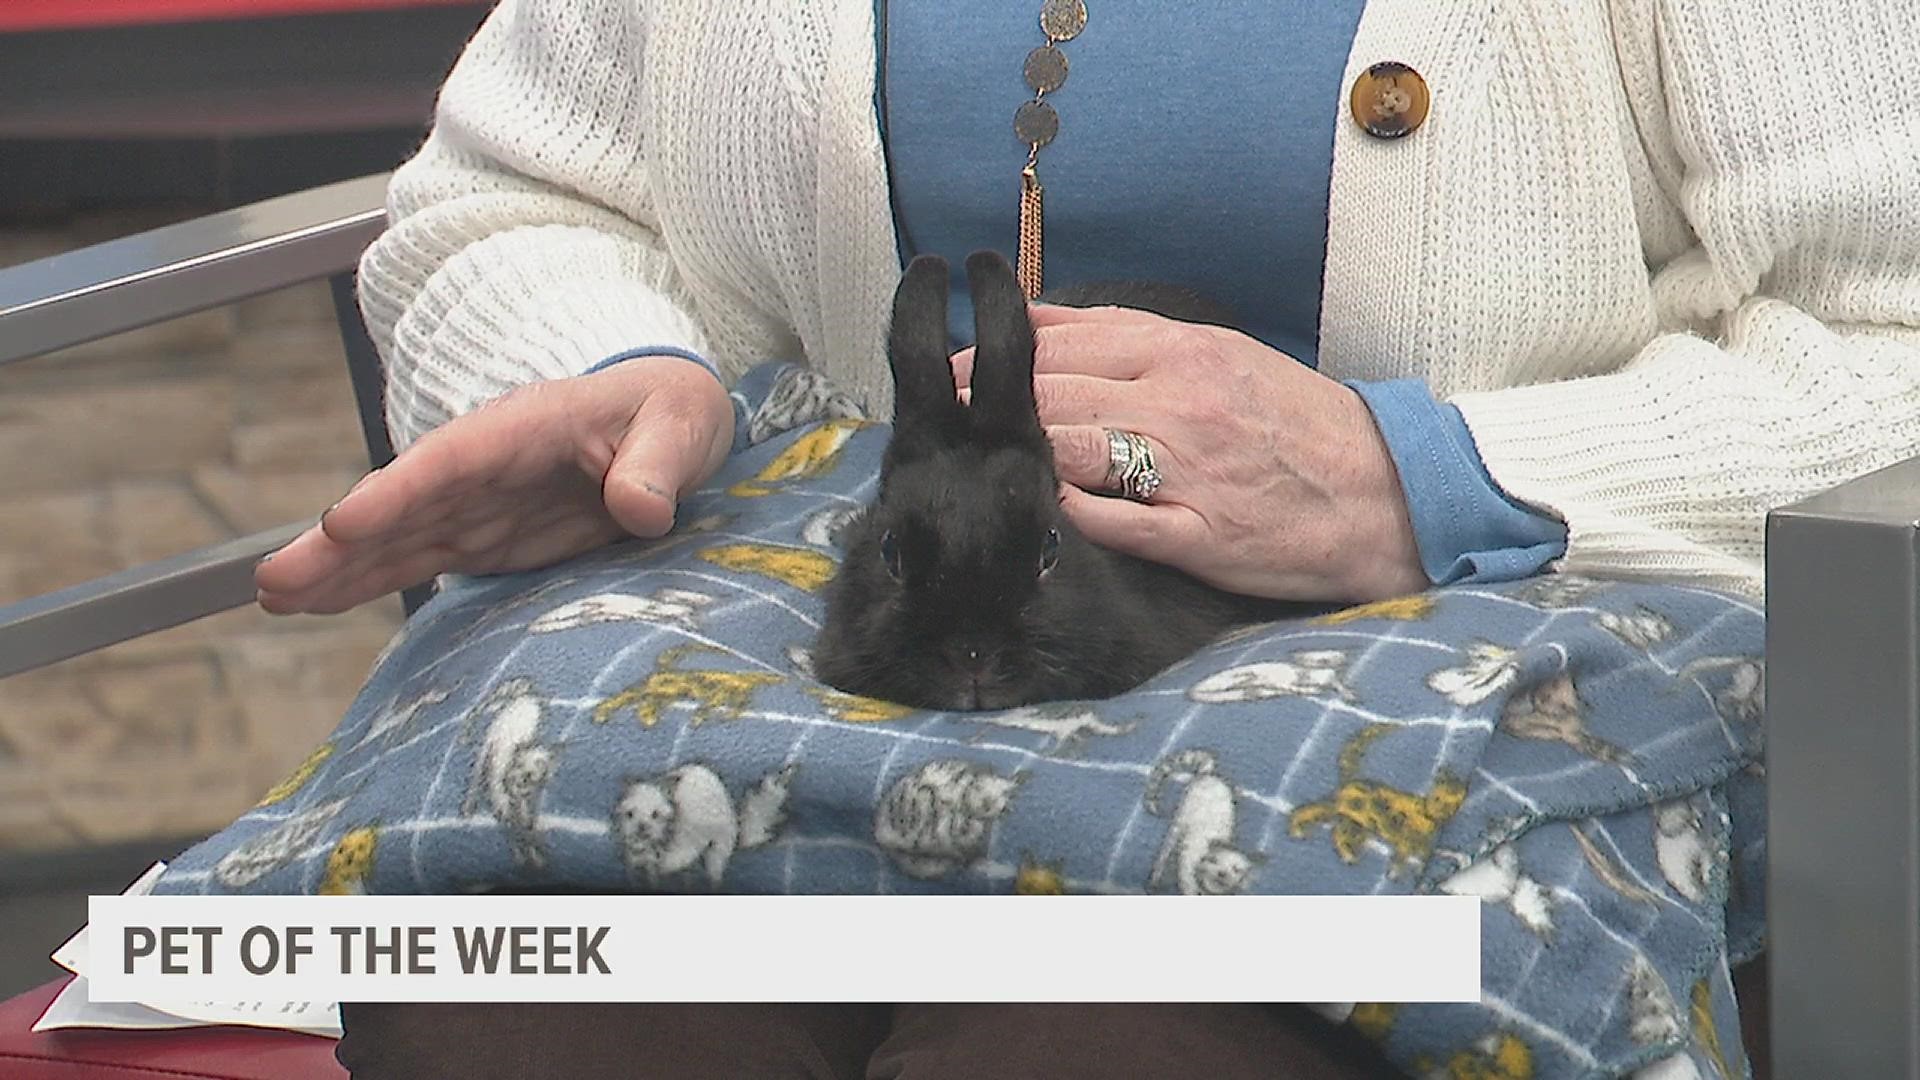 Patti with the Quad City Animal Welfare Center shows off Starbucks, who got his name from his foster parent. He's a 7-month-old Dutch bunny and ready for adoption!